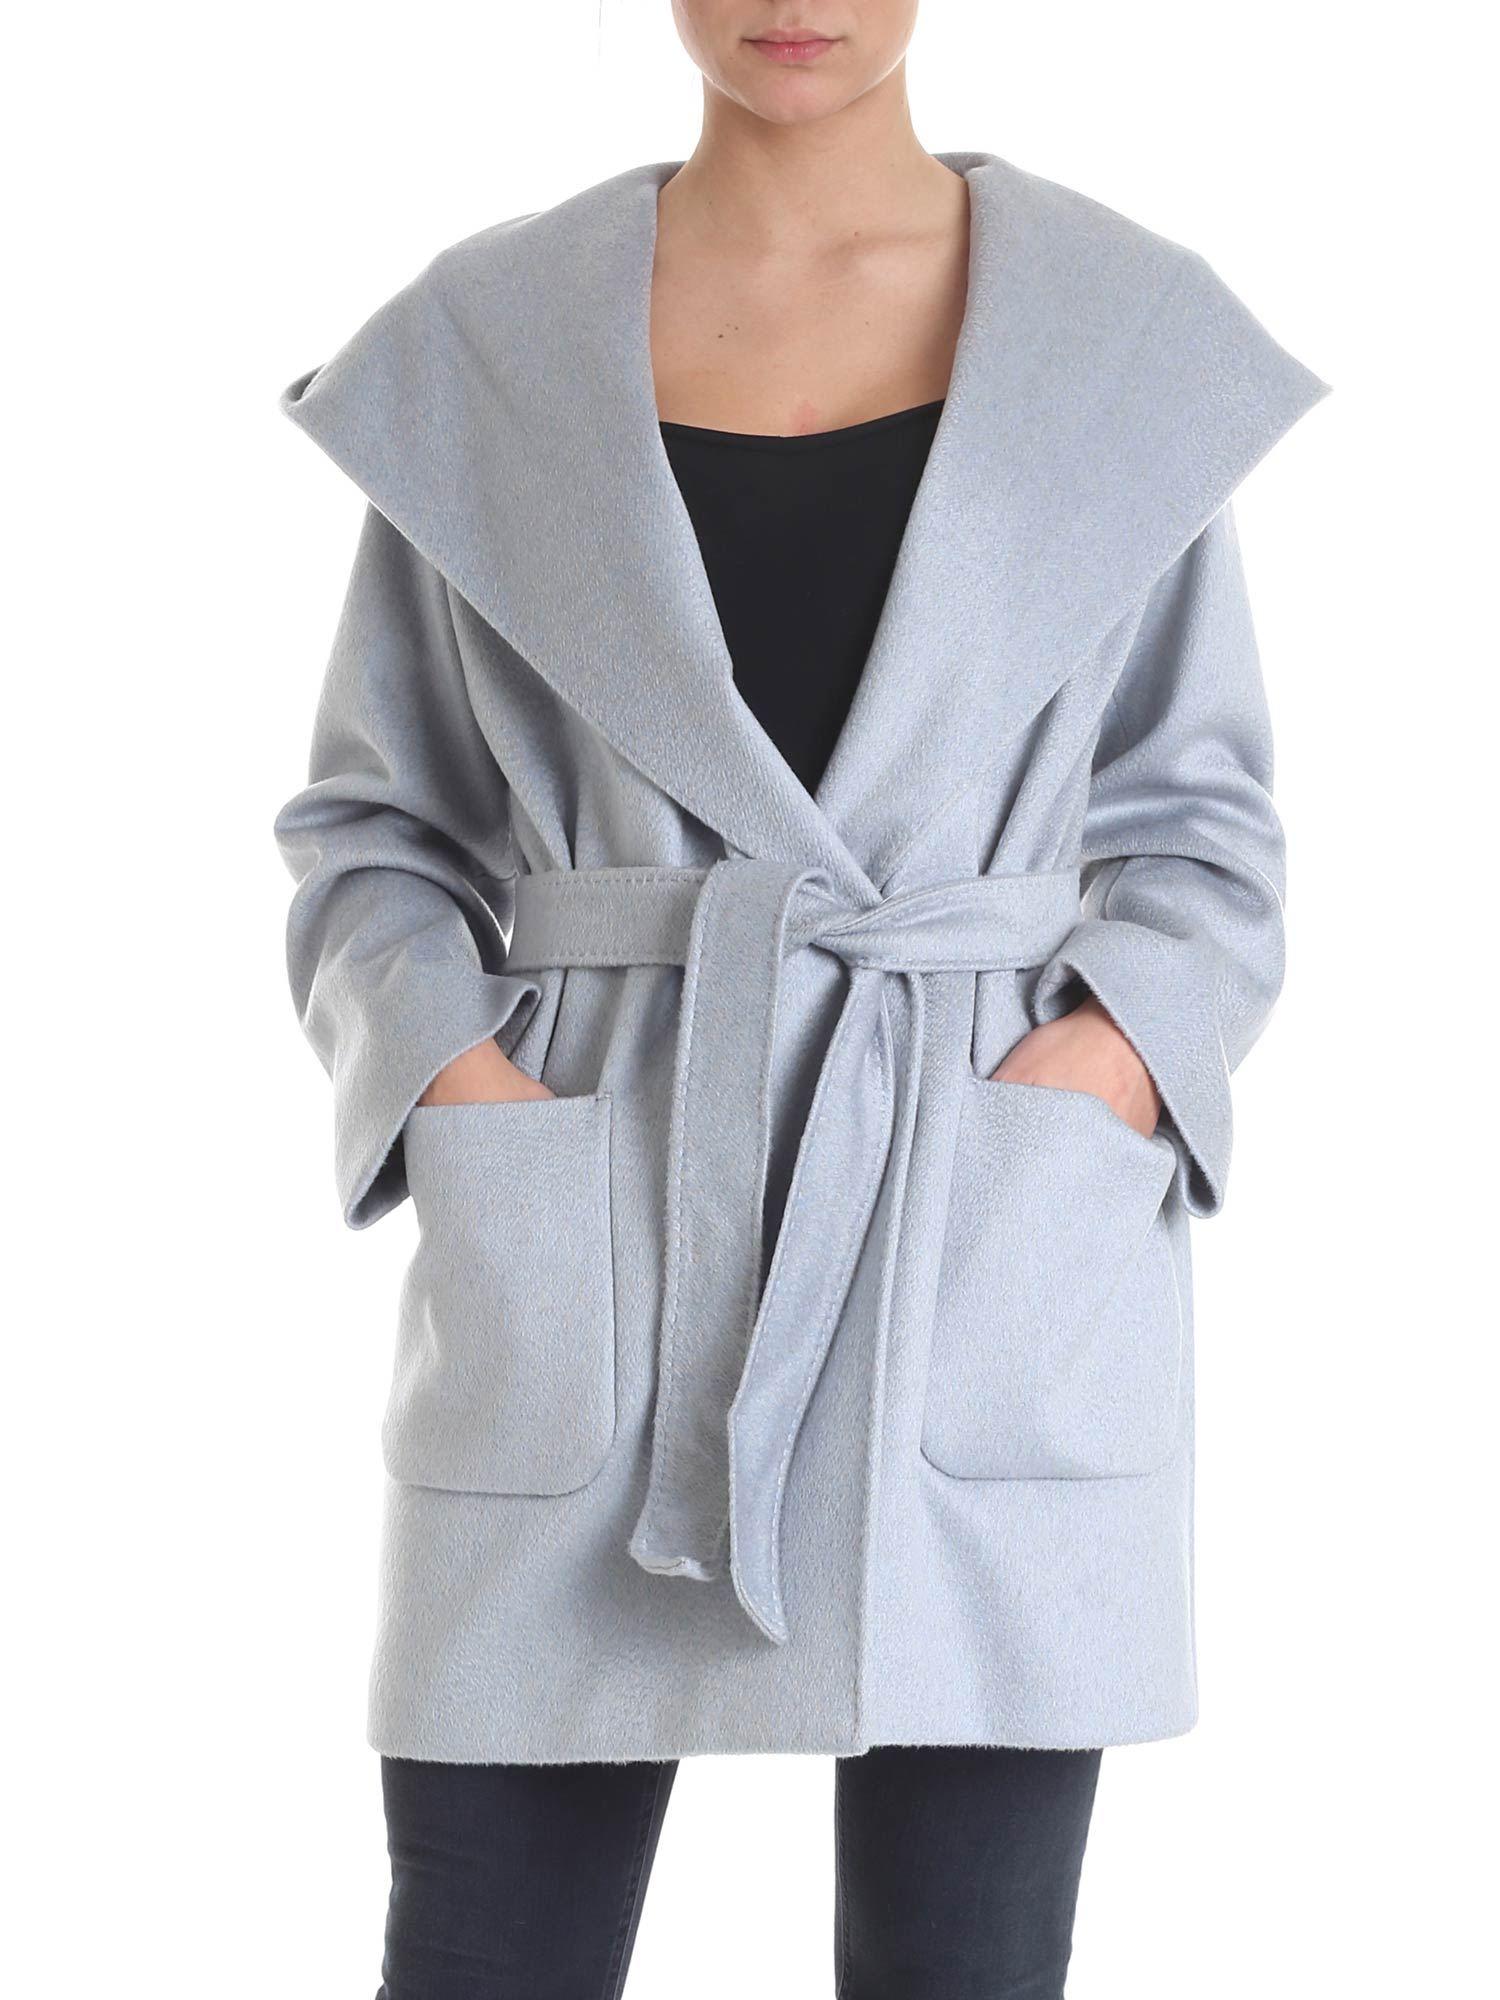 Max Mara Studio Cashmere And Camel Wool Coat In Light Blue - Lyst